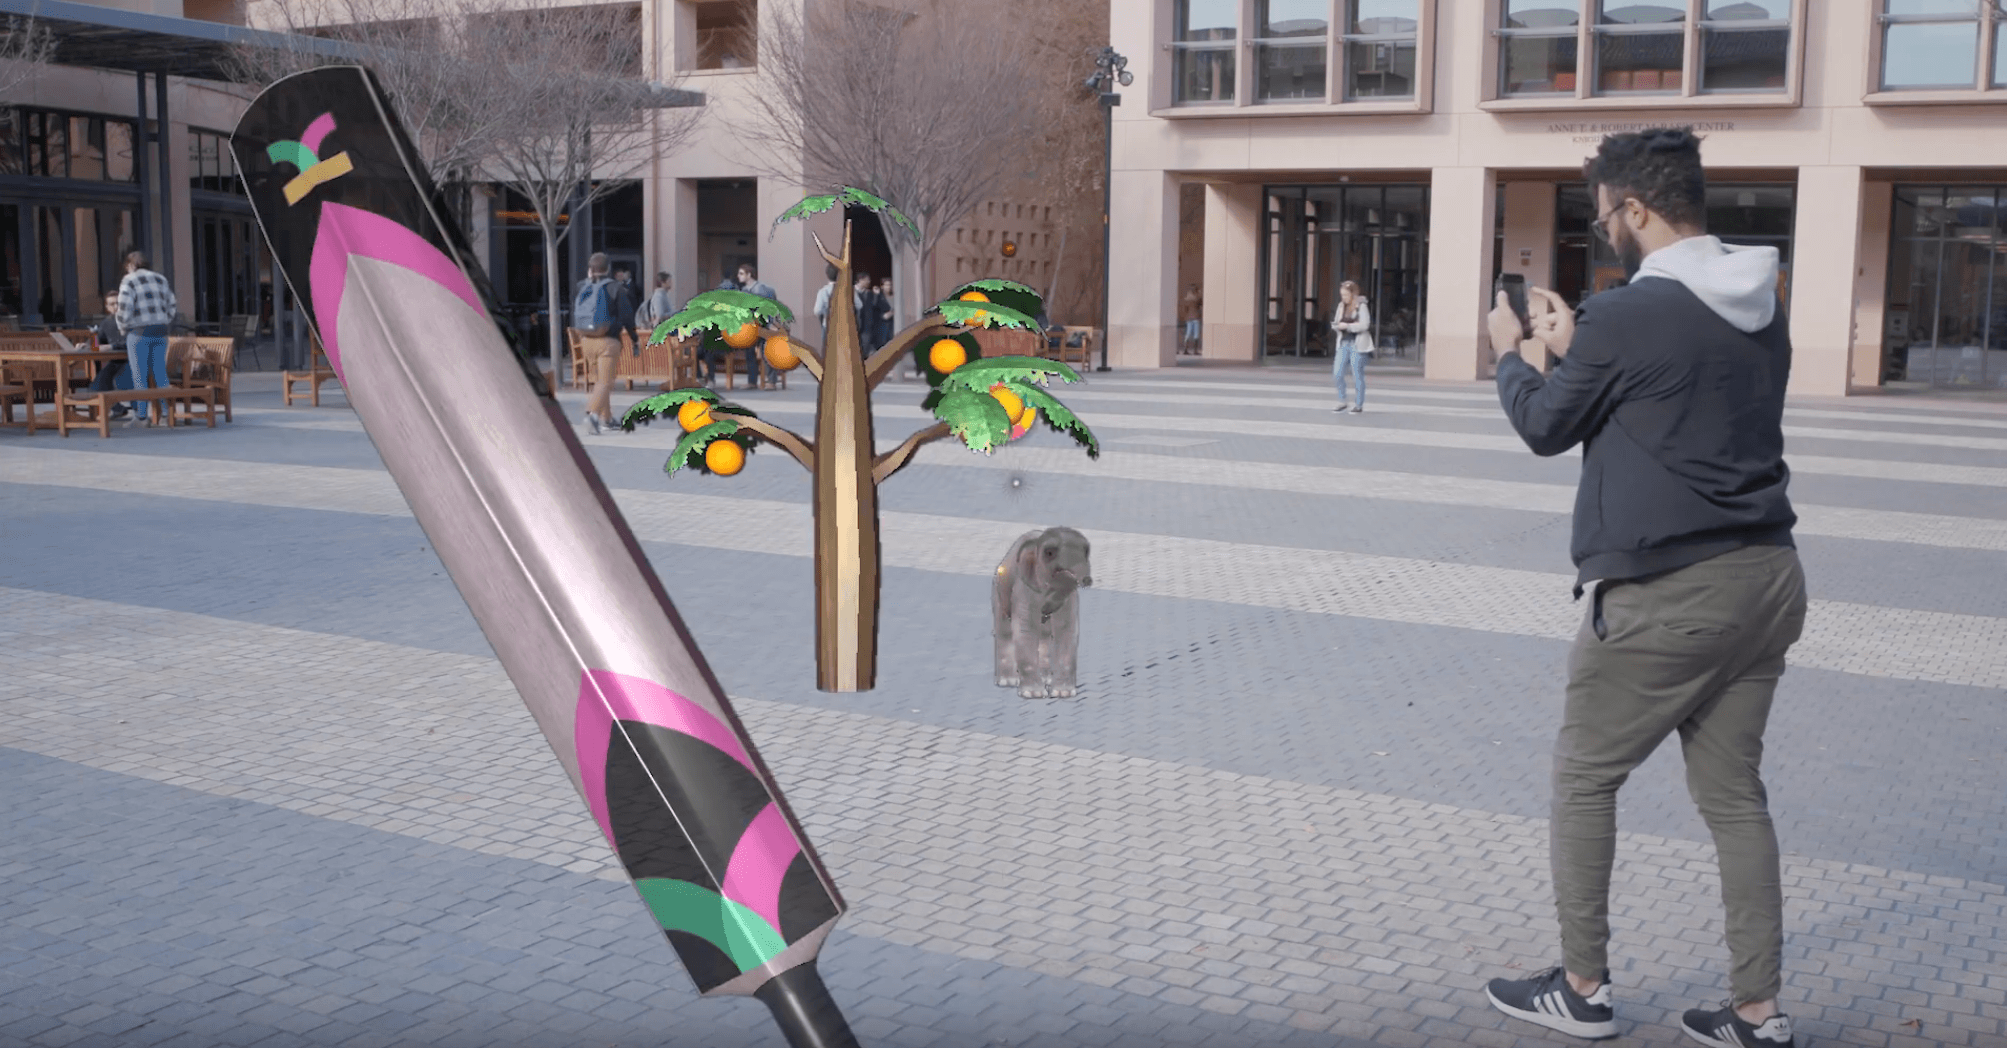 KRIKEY JOINS THE PITCH WITH A NEW AR CRICKET GAME JUST IN TIME FOR THE WORLD CUP